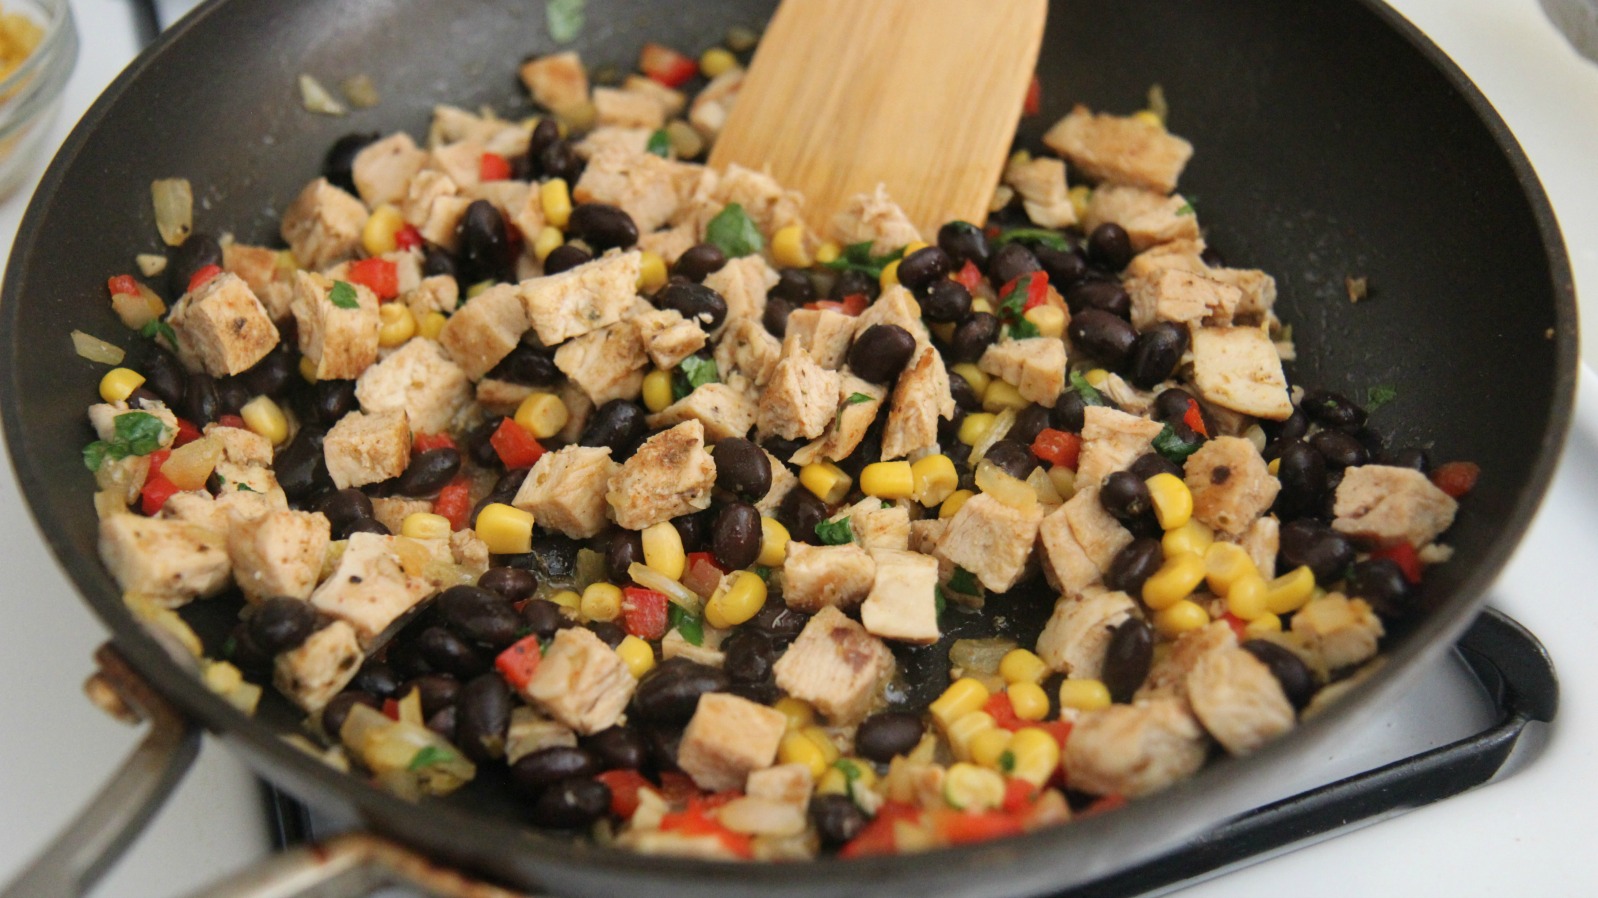 Mix the cubed chicken in with the beans, corn, pepper and more spices. Don't overcook or the chicken will become dry.